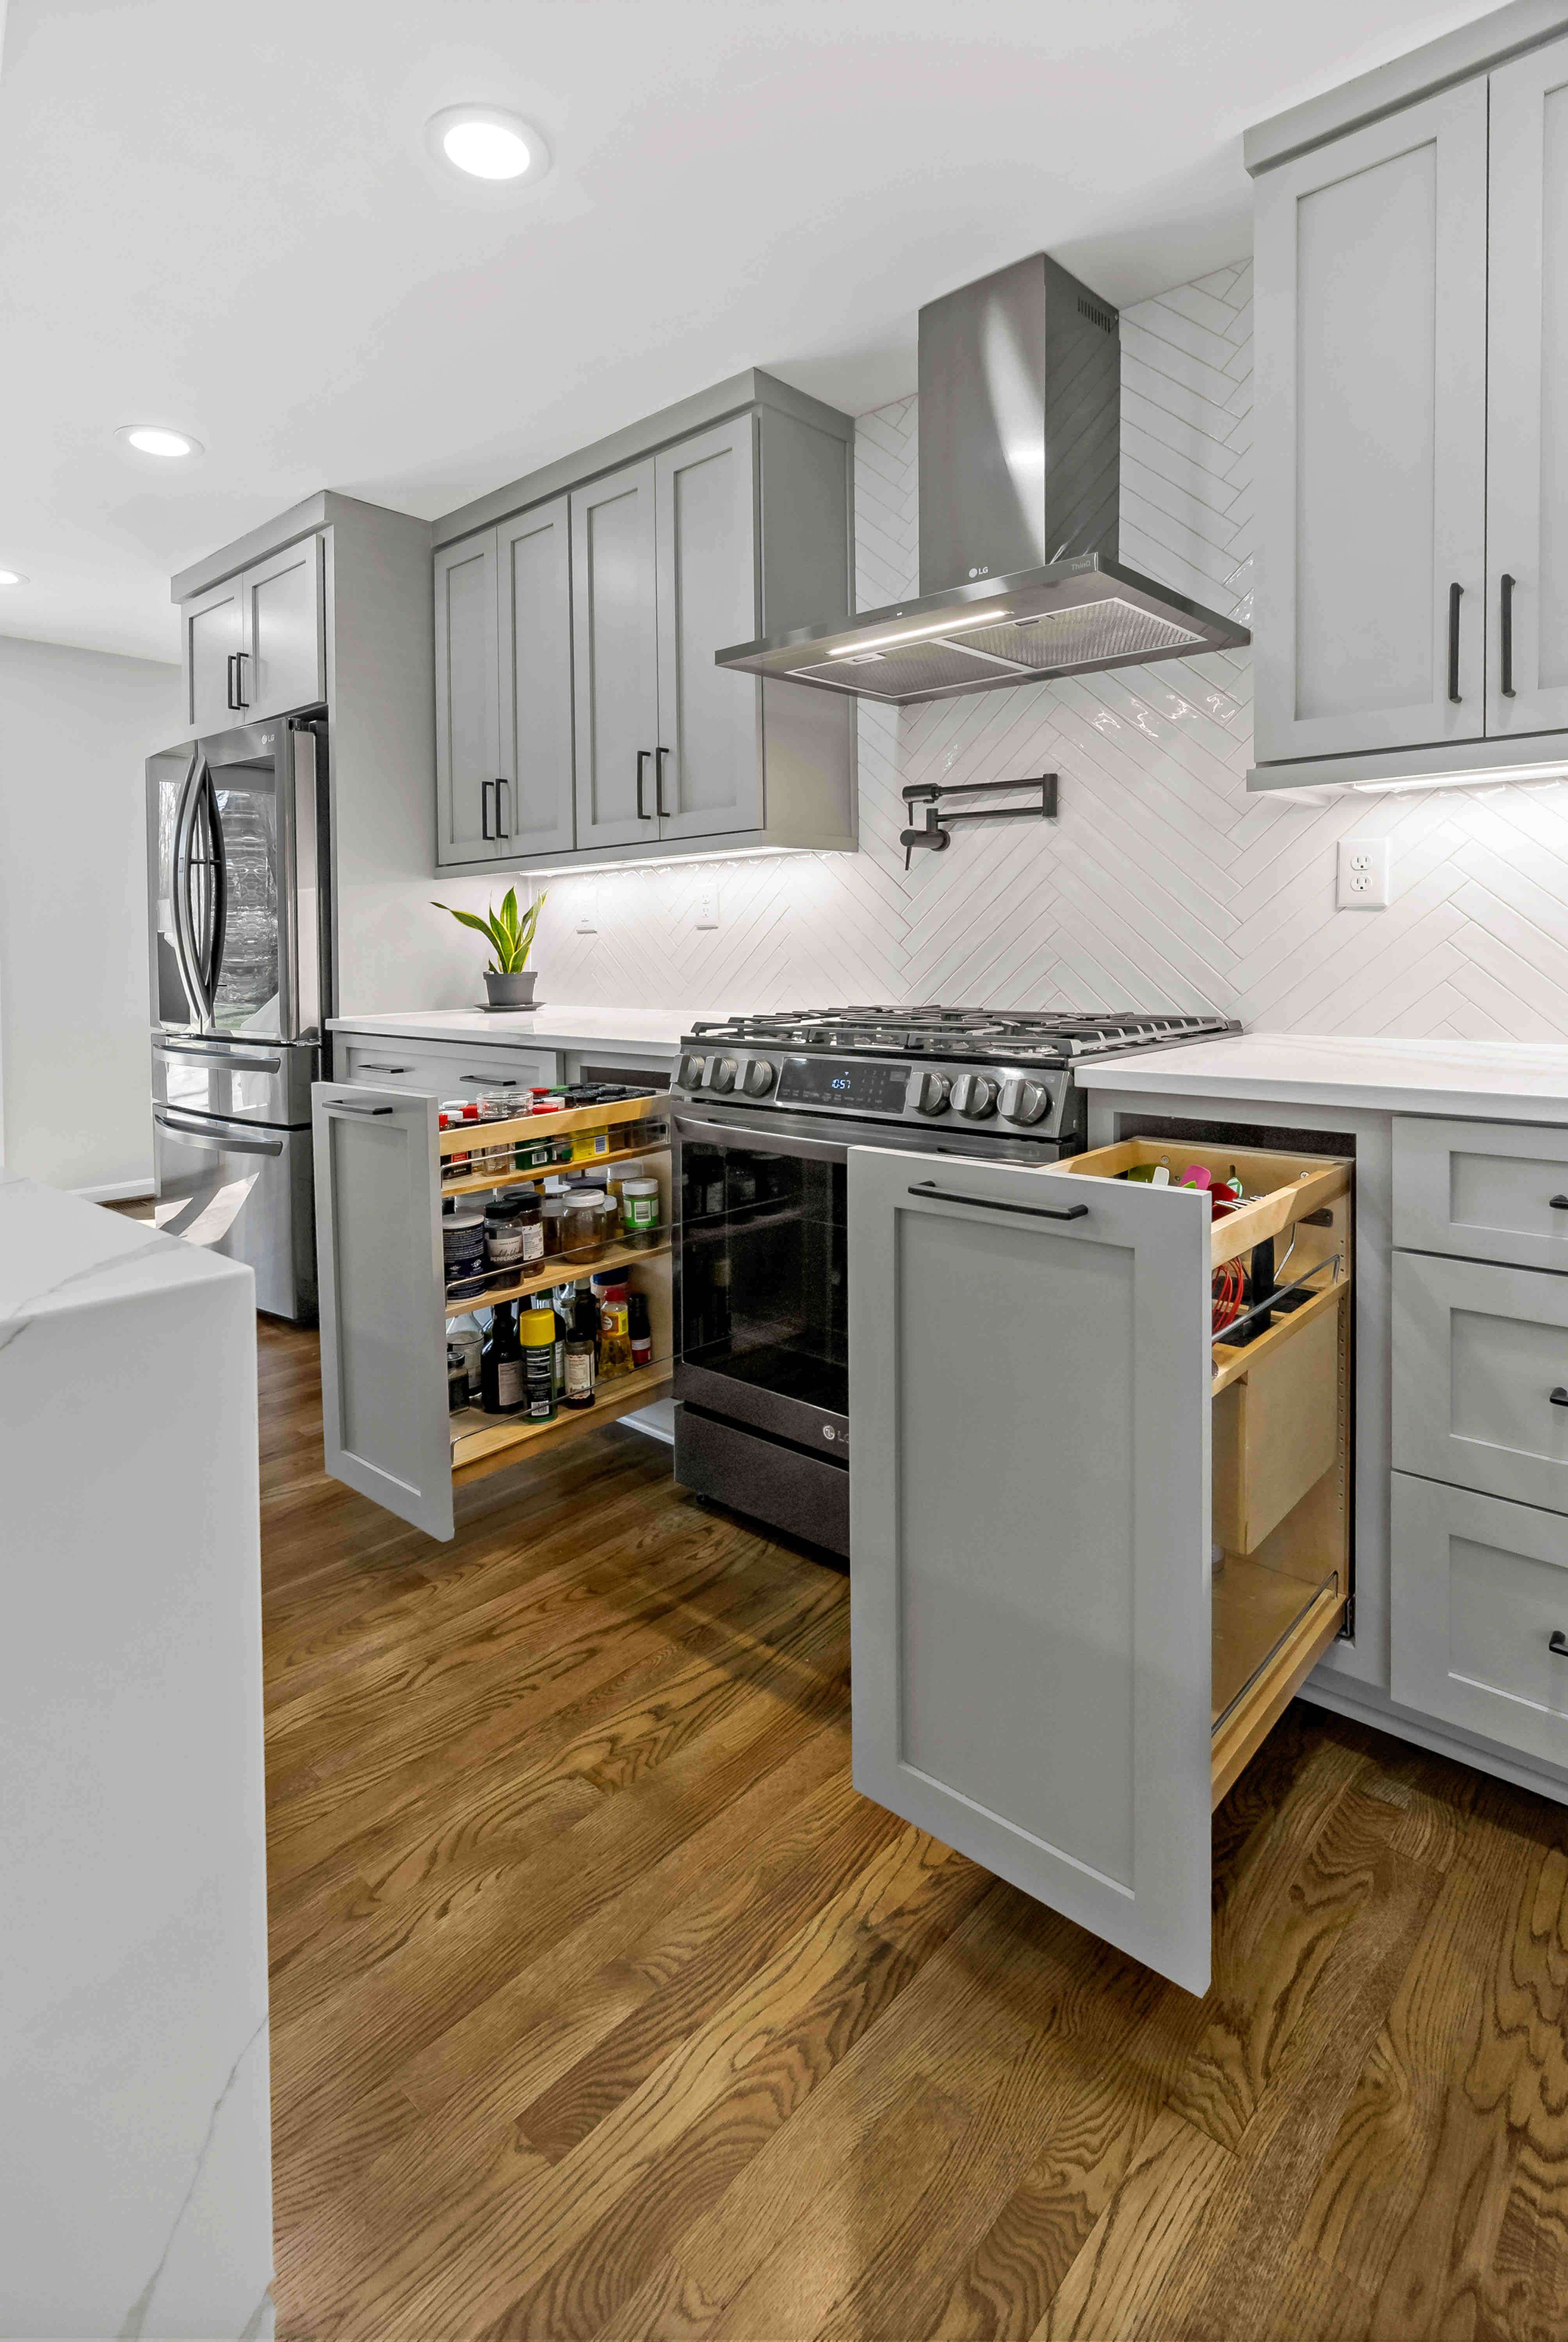 Unique pull-out kitchen cabinets for storage by stove